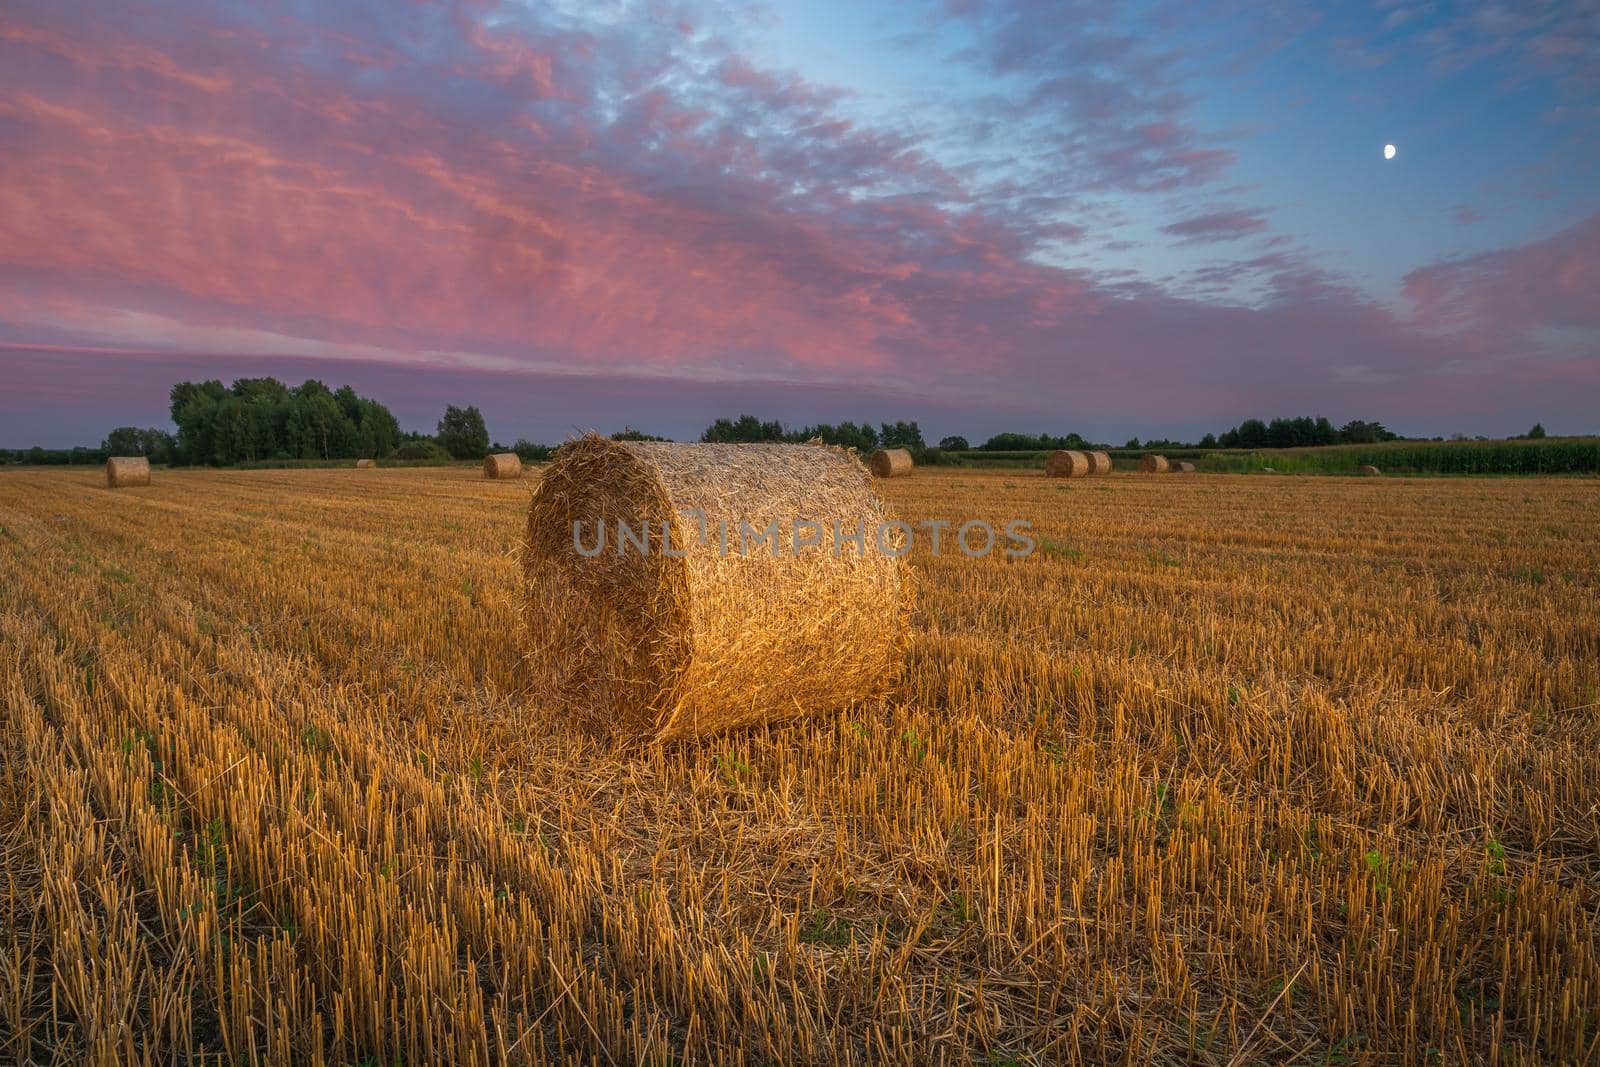 Colorful evening clouds and hay bales in the field by darekb22